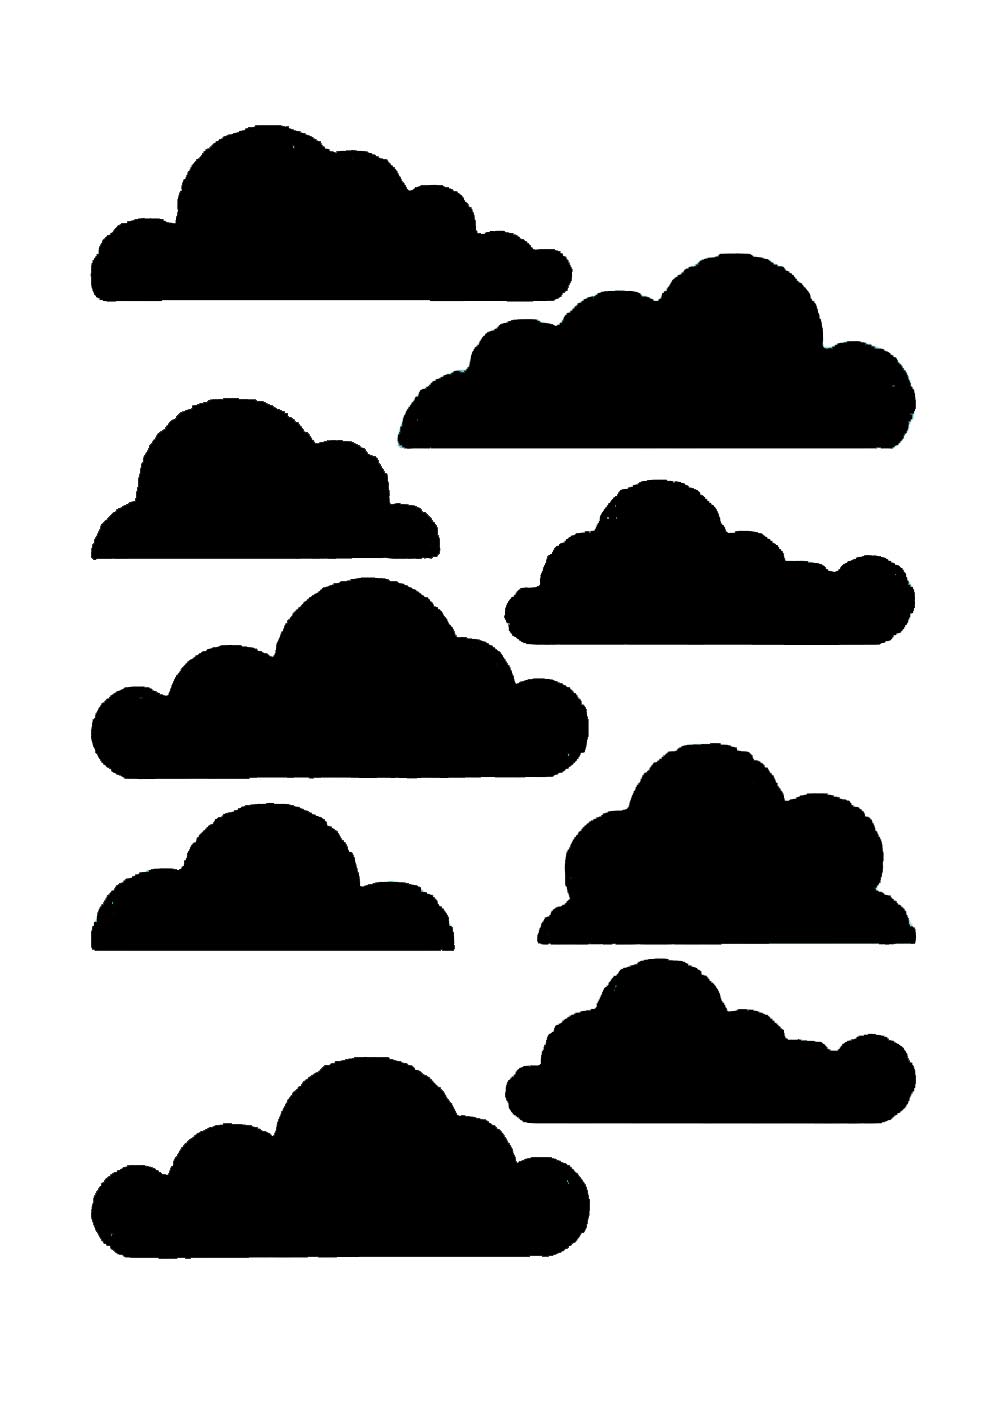 Cloud stencils - Free stencils and template cutout printable